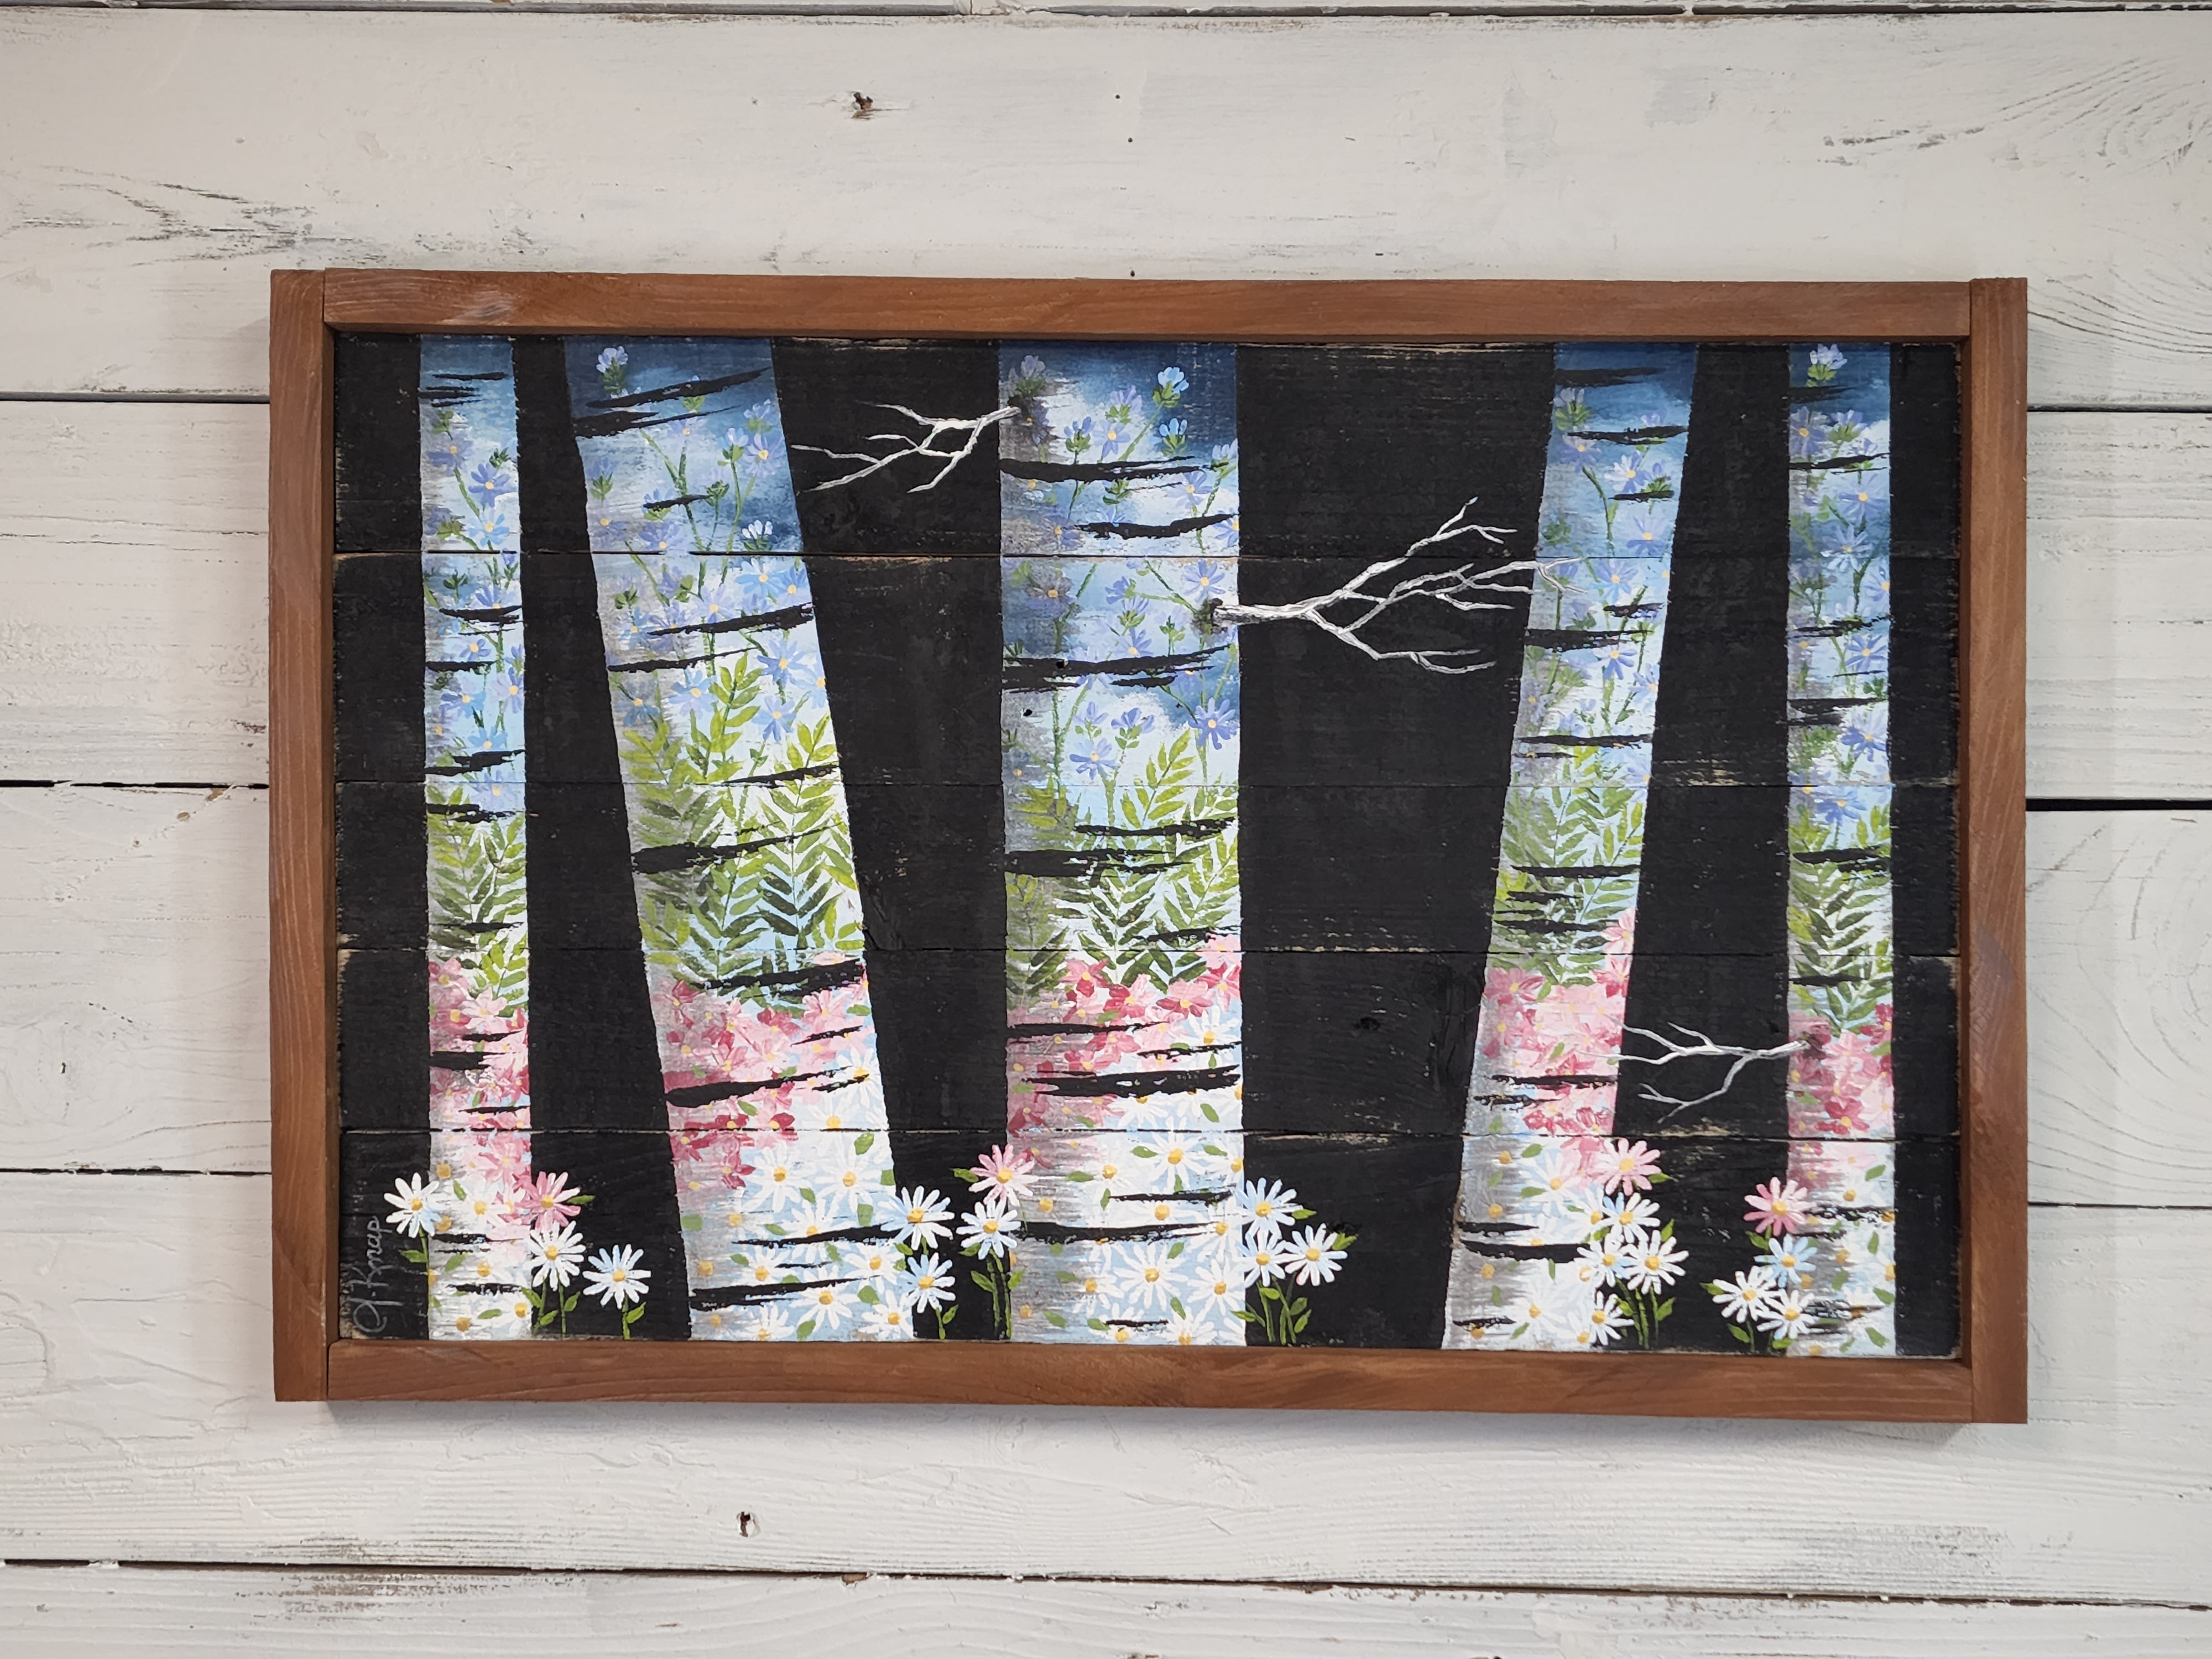 Abstract White Birch wall art Painting, part of "Birch Reflections" collection, Spring and Summer flower painting on pallet wood